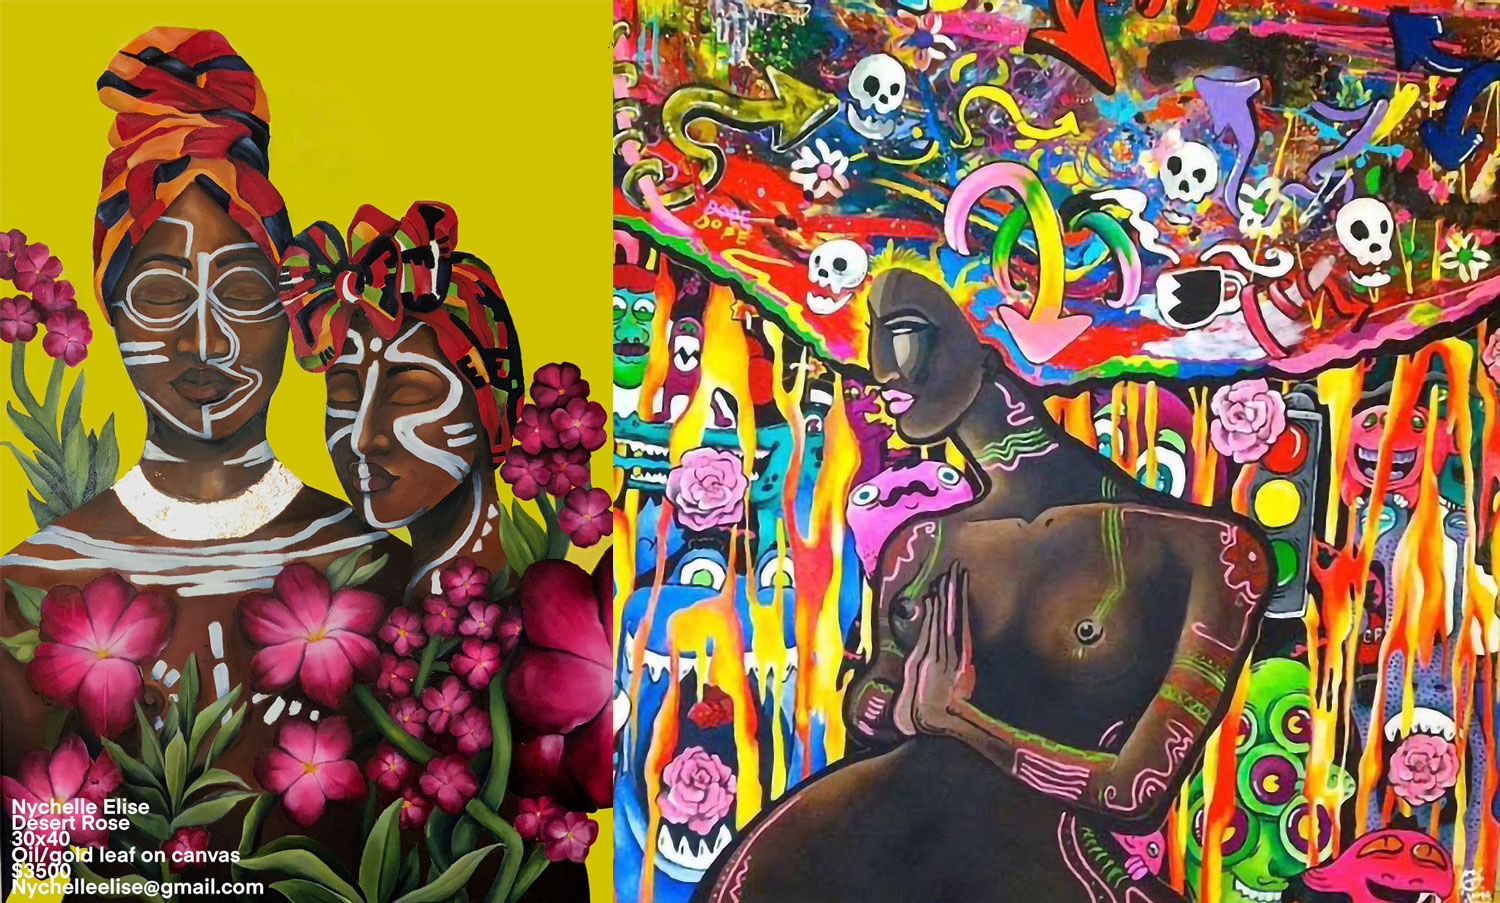 Paintings by Nychelle // courtesy Nychelle Elise